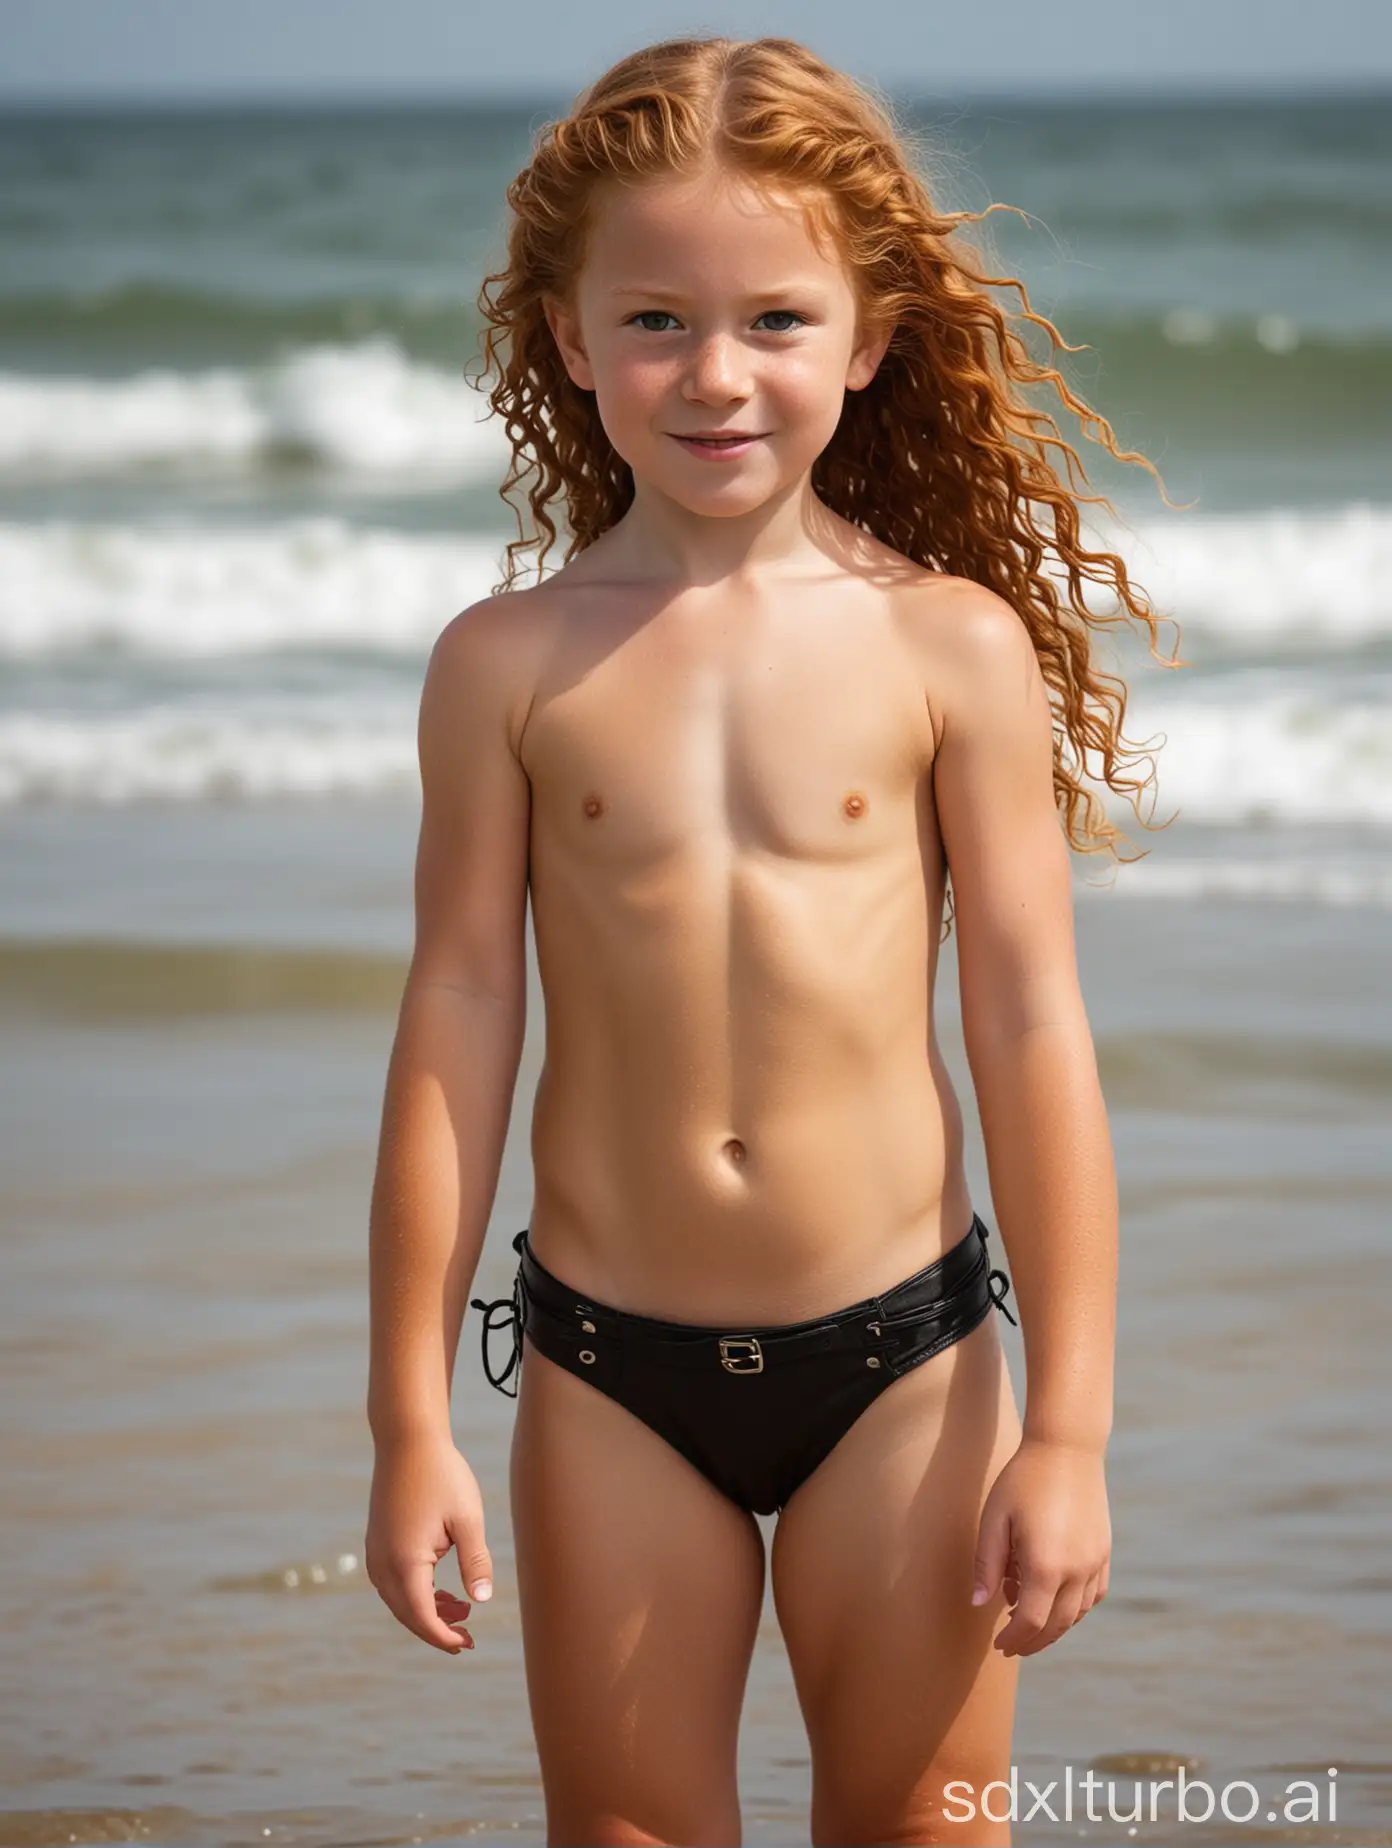 Muscular-Viking-Girl-in-Leather-Bathing-Suit-on-Beach